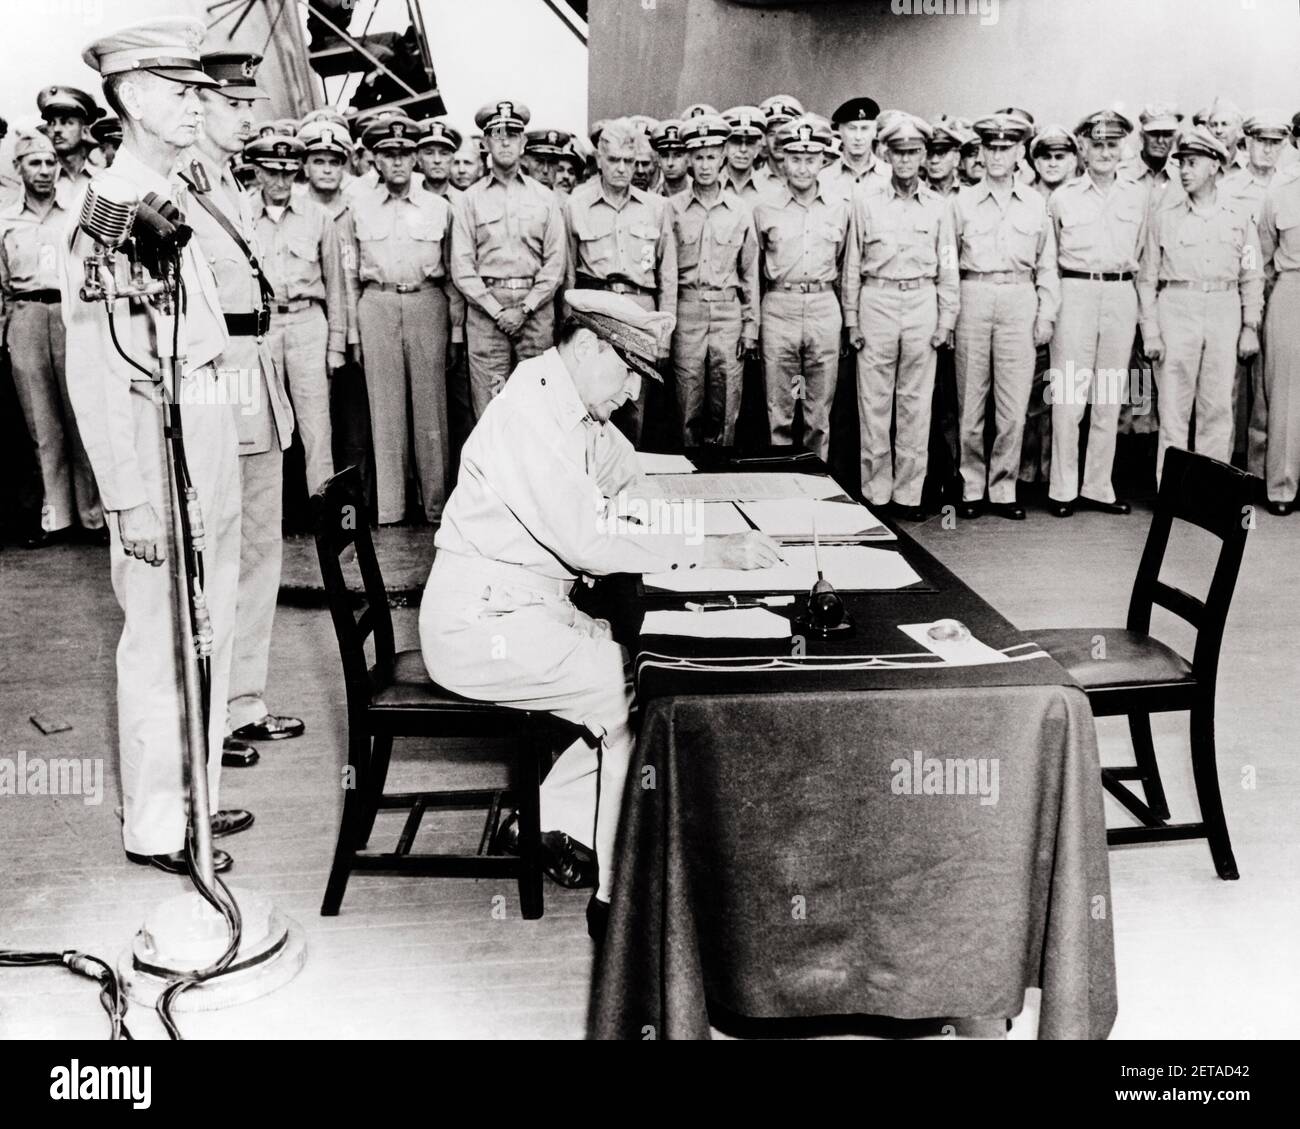 1940s SEPTEMBER 2 1945 GENERAL MACARTHUR SIGNS JAPANESE SURRENDER DOCUMENT ABOARD THE USS MISSOURI IN TOKYO BAY JAPAN - m3368 HAR001 HARS WORLD WAR II AUTHORITY MARINES OCCUPATIONS POLITICS UNIFORMS BATTLESHIP CONCEPTUAL STYLISH WORLD WAR 2 OFFICERS 1945 ADMIRALS SURRENDER USS ABOARD AUGUST BLACK AND WHITE CAUCASIAN ETHNICITY GENERALS HAR001 OLD FASHIONED Stock Photo